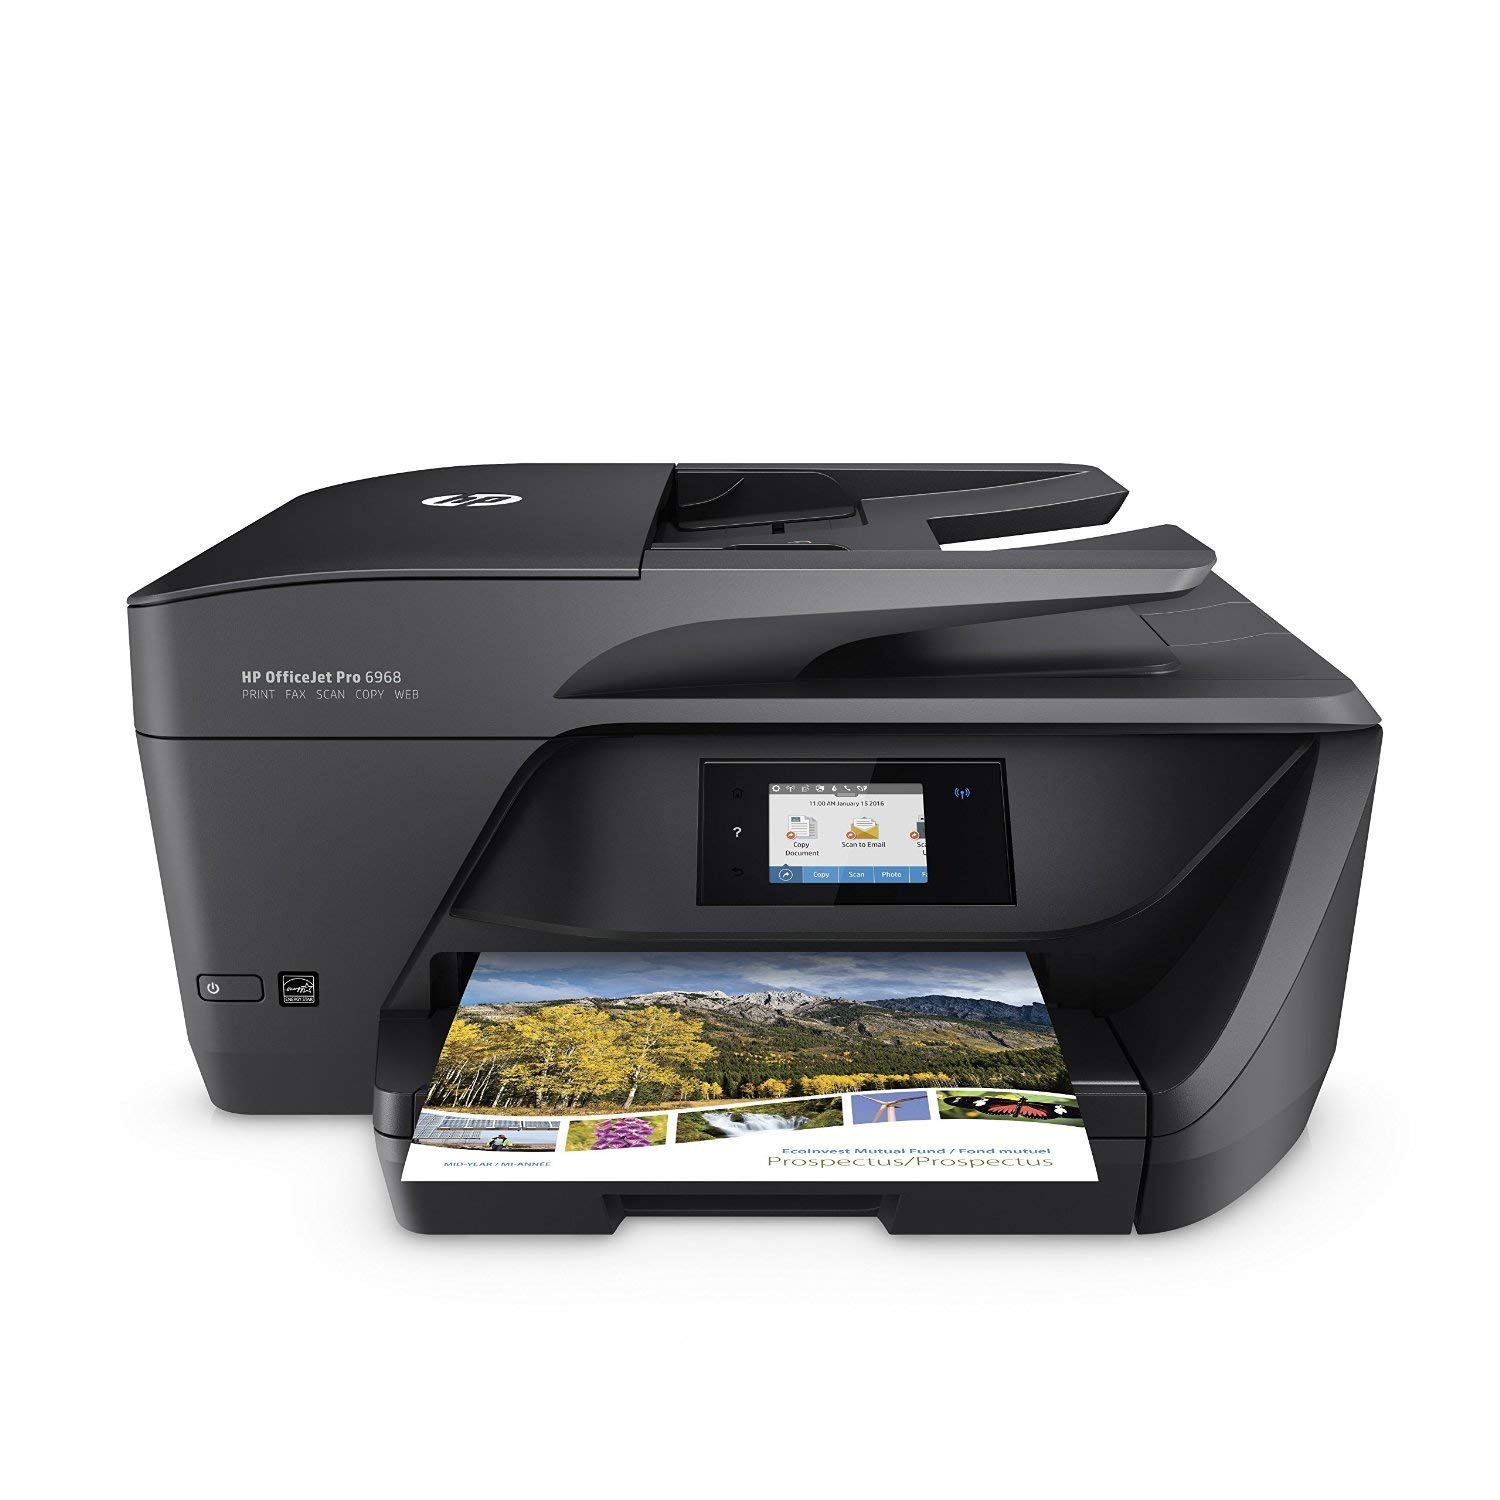 HP OfficeJet Pro 6968 Driver Downloads | Download Drivers ...